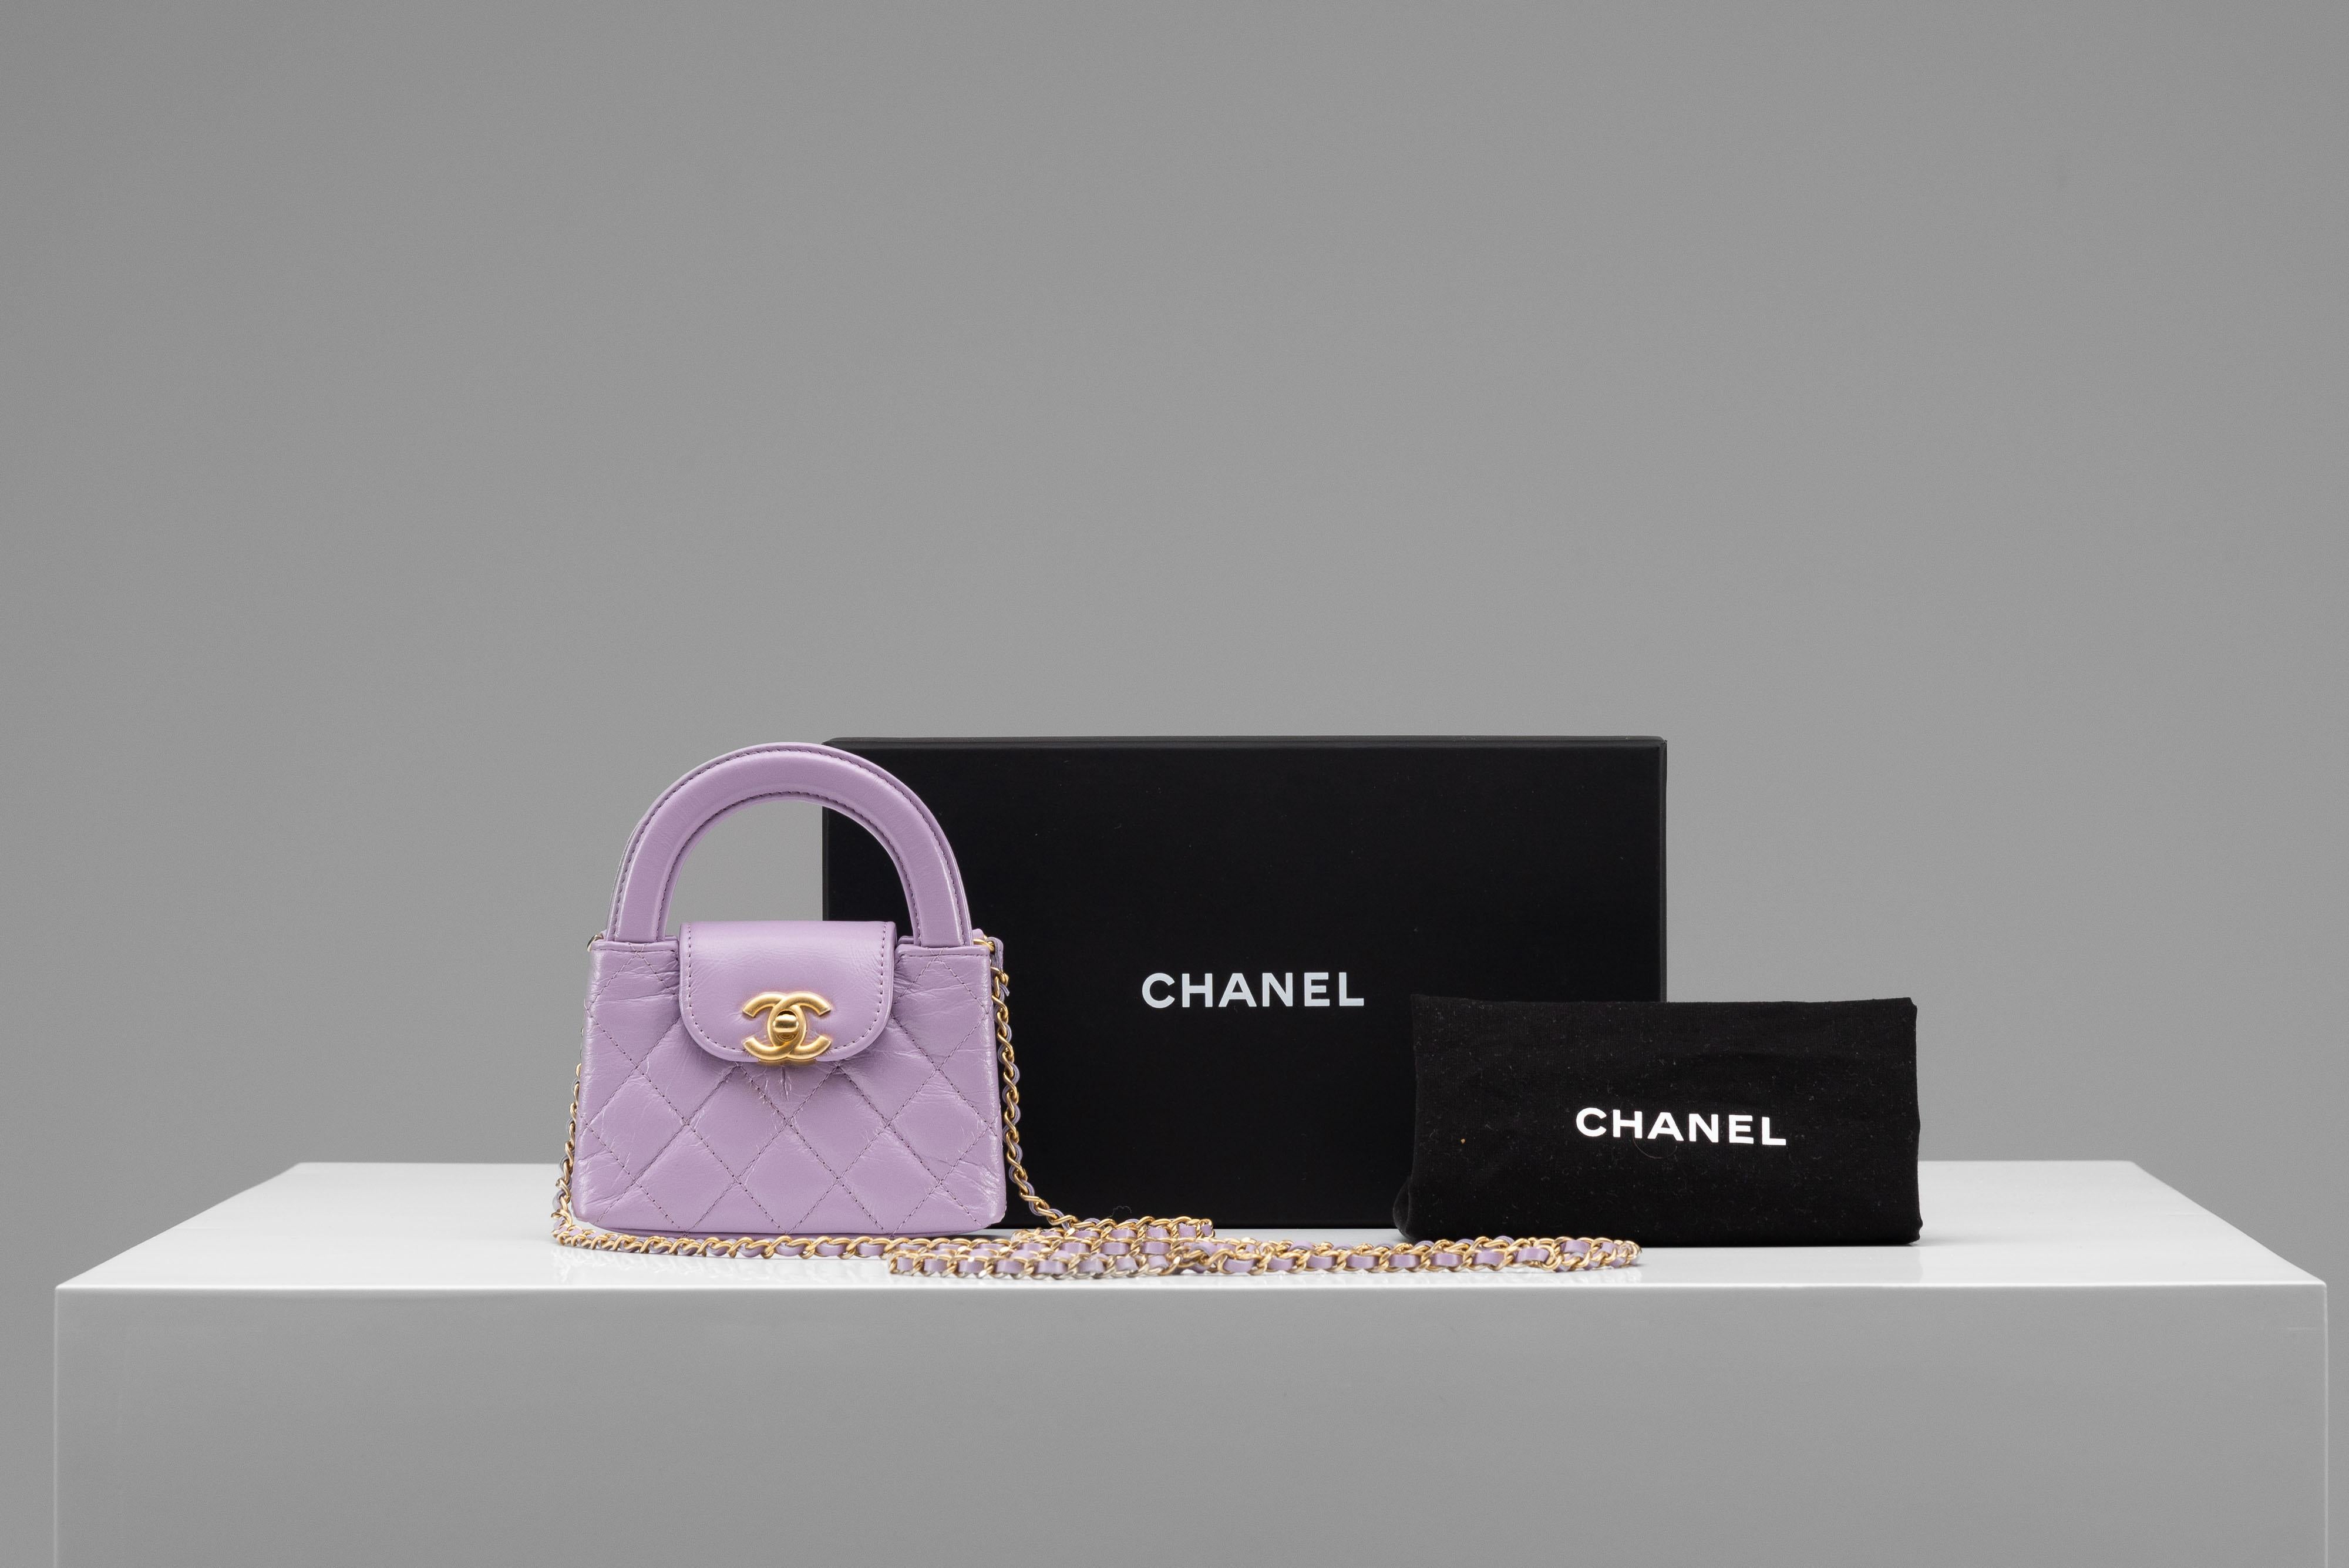 From the collection of SAVINETI we offer this NEW Chanel Nano Kelly Bag:

- Brand: Chanel
- Model: Nano Kelly
- Color: Lilac
- Year: 2024
- Condition: NEW (unused)
- Materials: Shiny aged calfskin, Brushed gold hardware
- Extras: Full-Set (Dustbag,